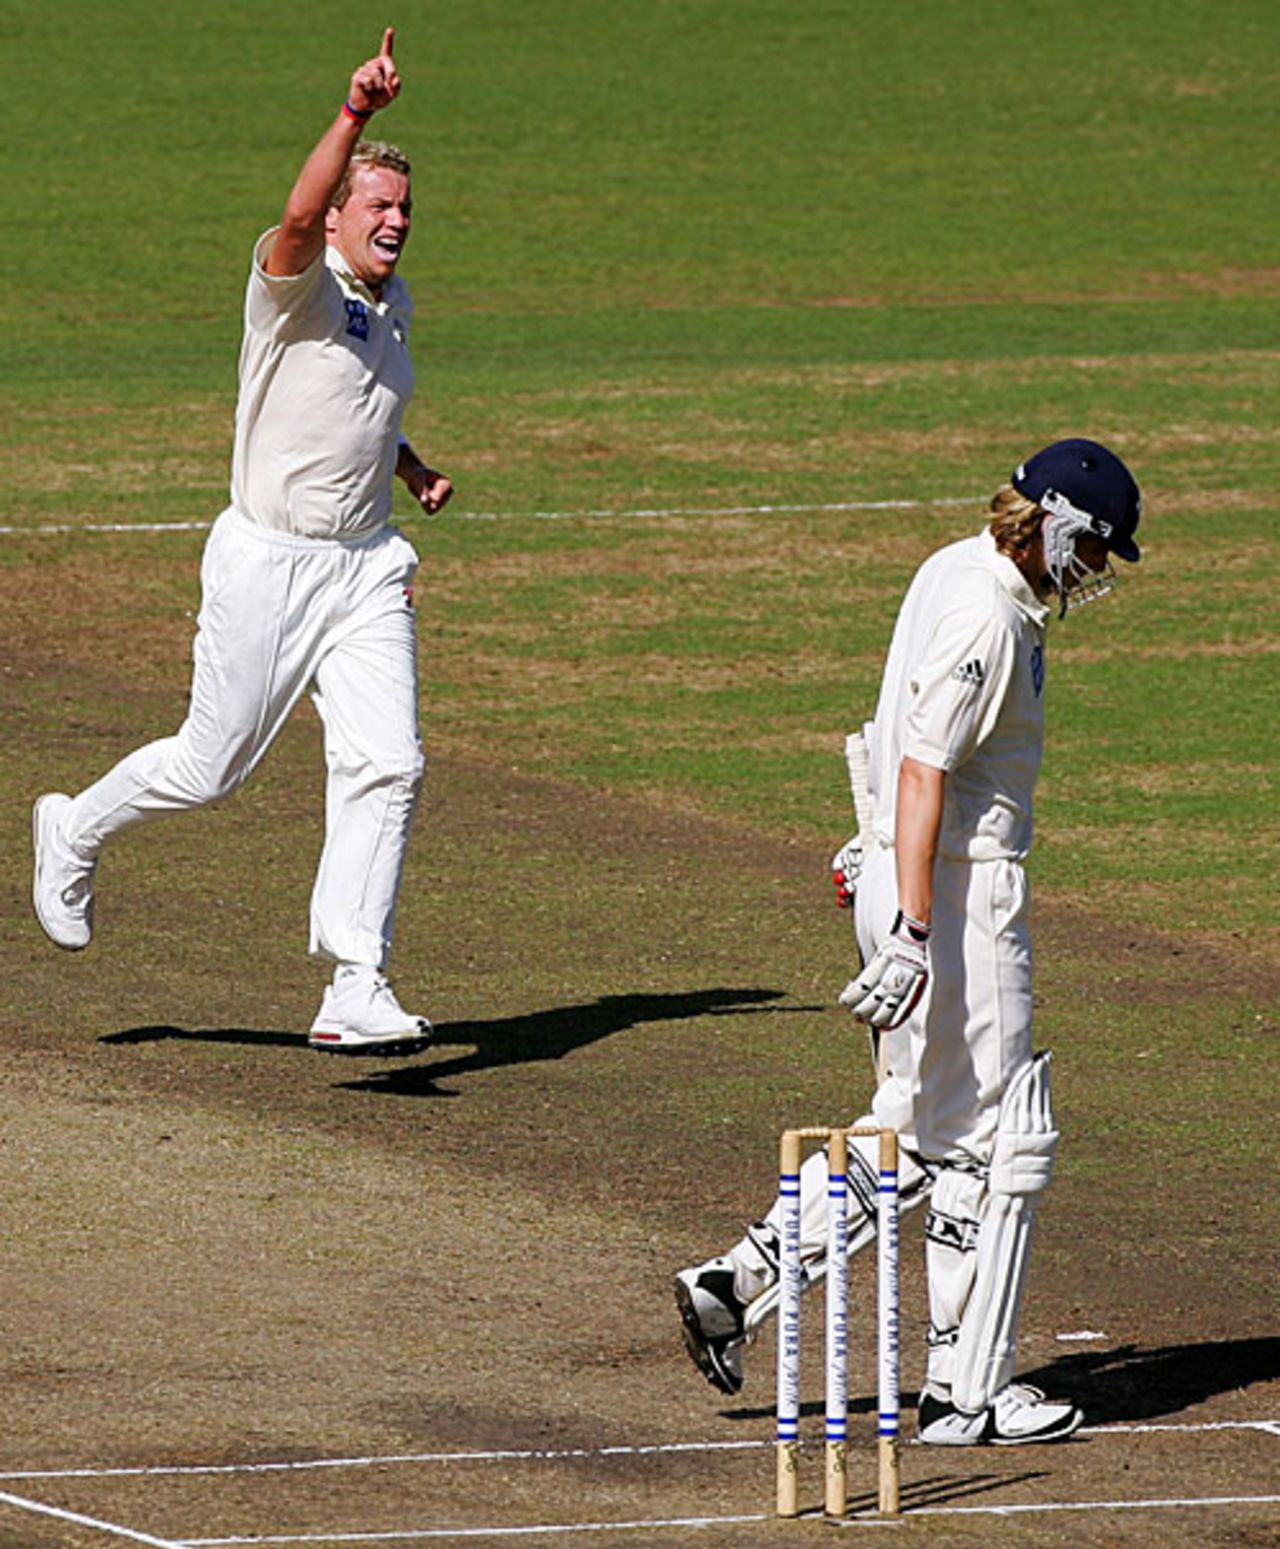 Peter Siddle celebrates Nathan Bracken's wicket, New South Wales v Victoria, Pura Cup final, Sydney, 2nd day, March 16, 2008